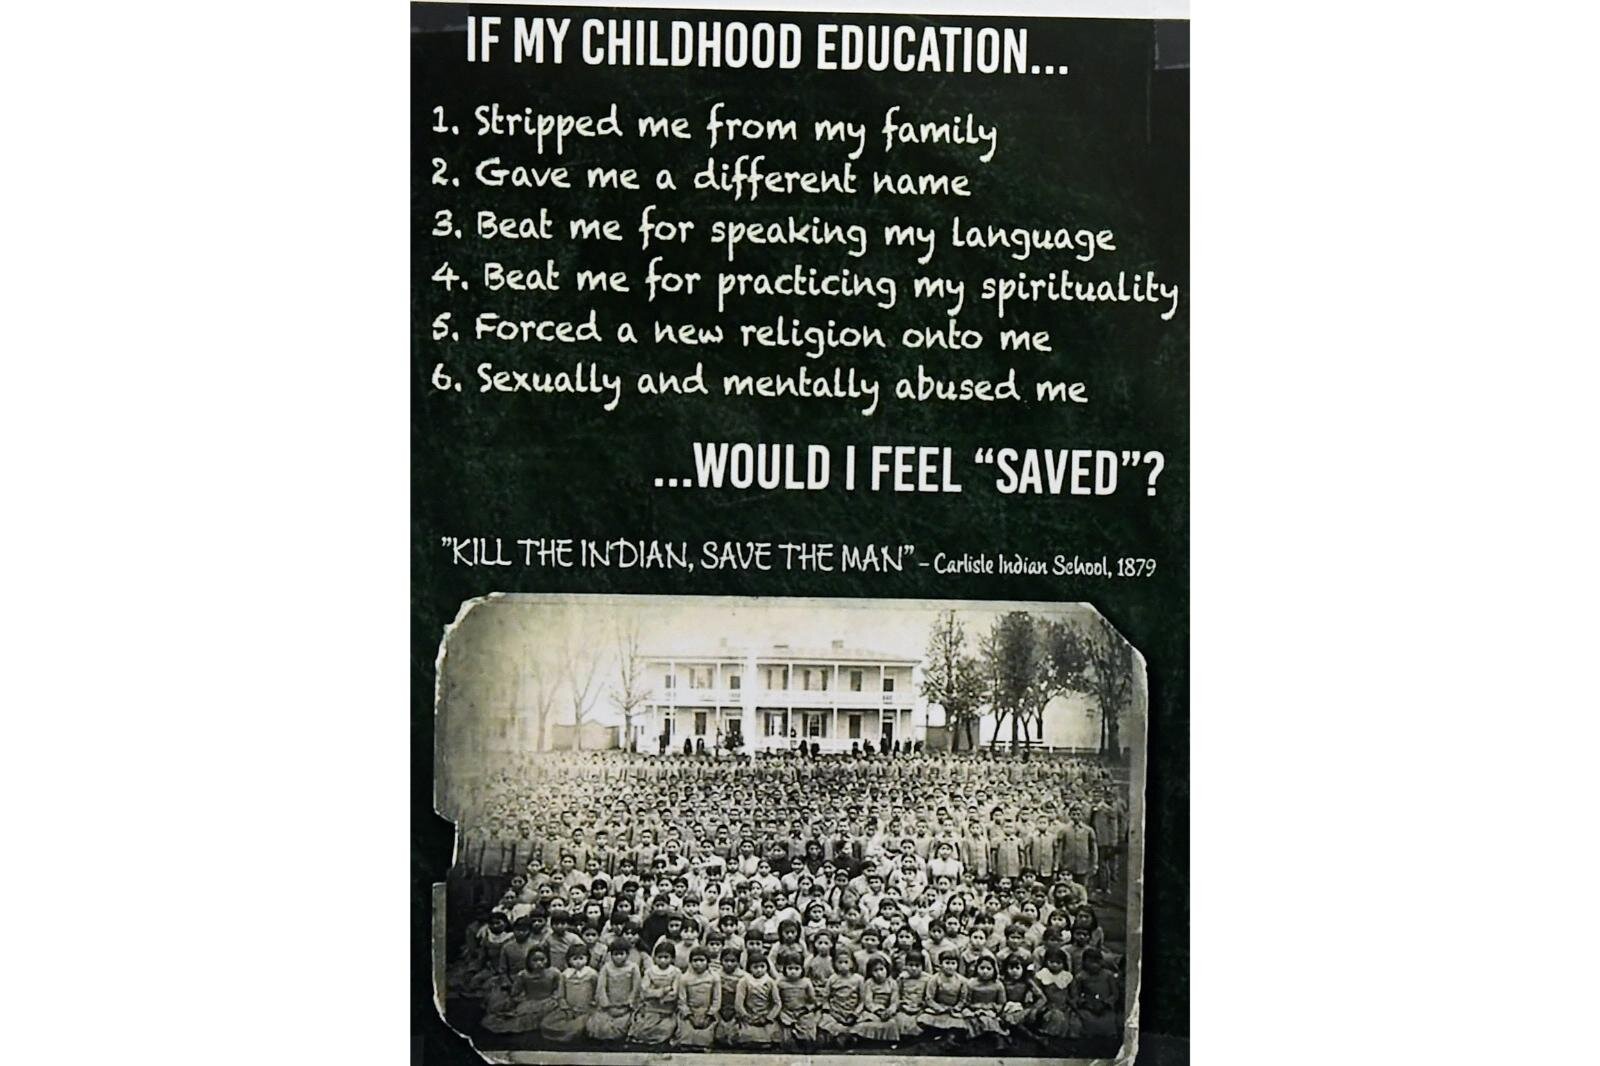  A poster made to reflect the perspective of students who attended schools like Holy Childhood School of Jesus in Harbor Springs.